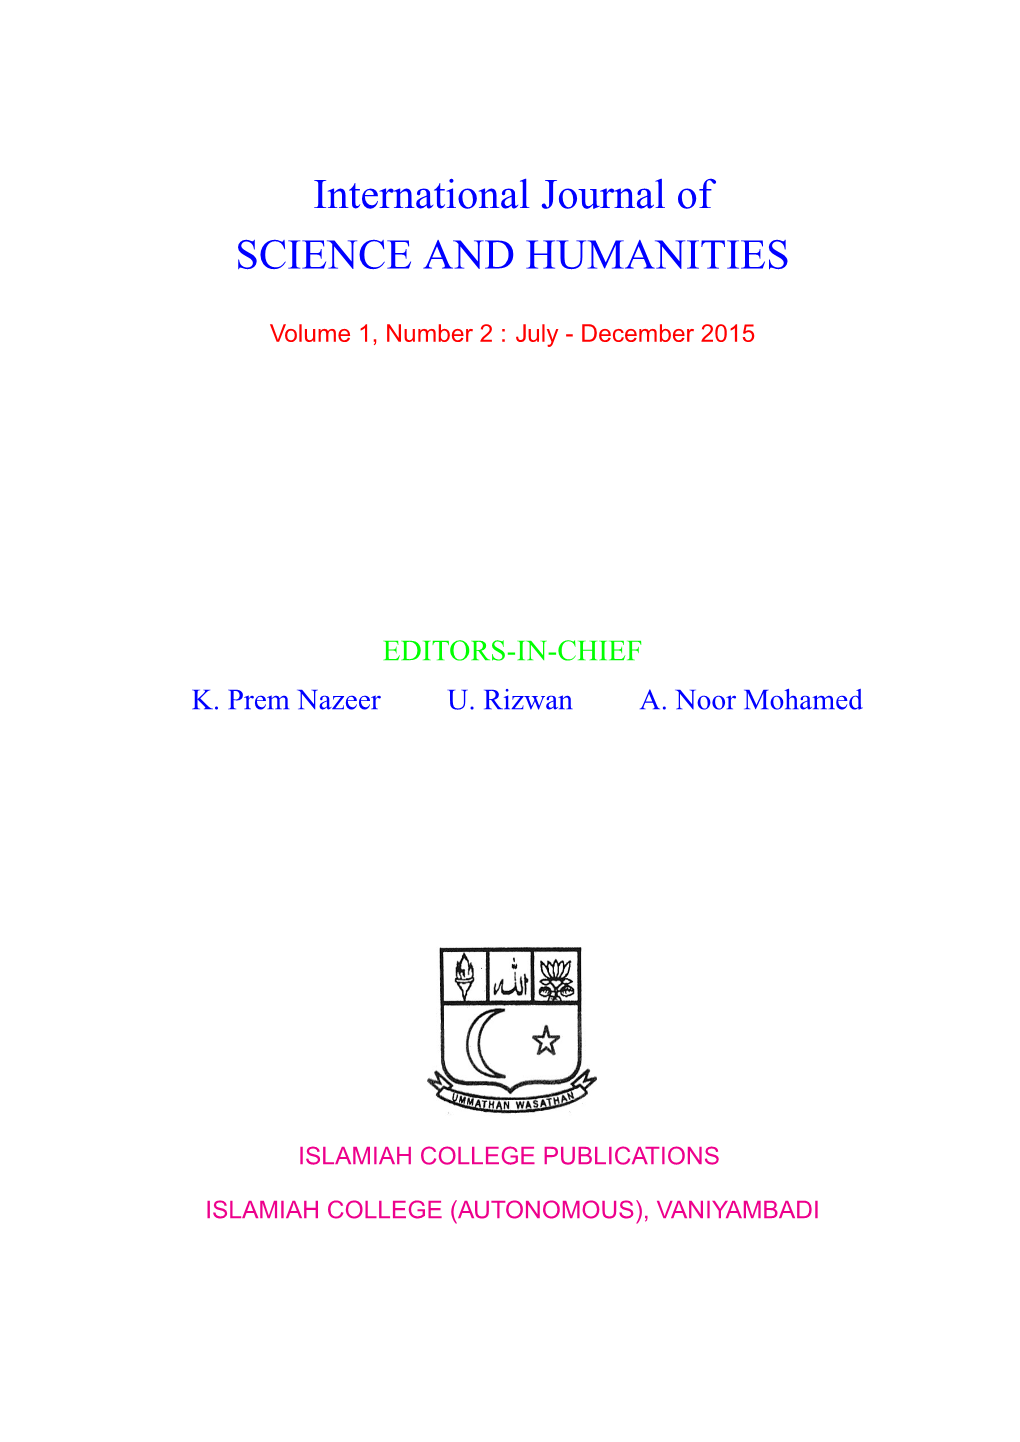 International Journal of SCIENCE and HUMANITIES